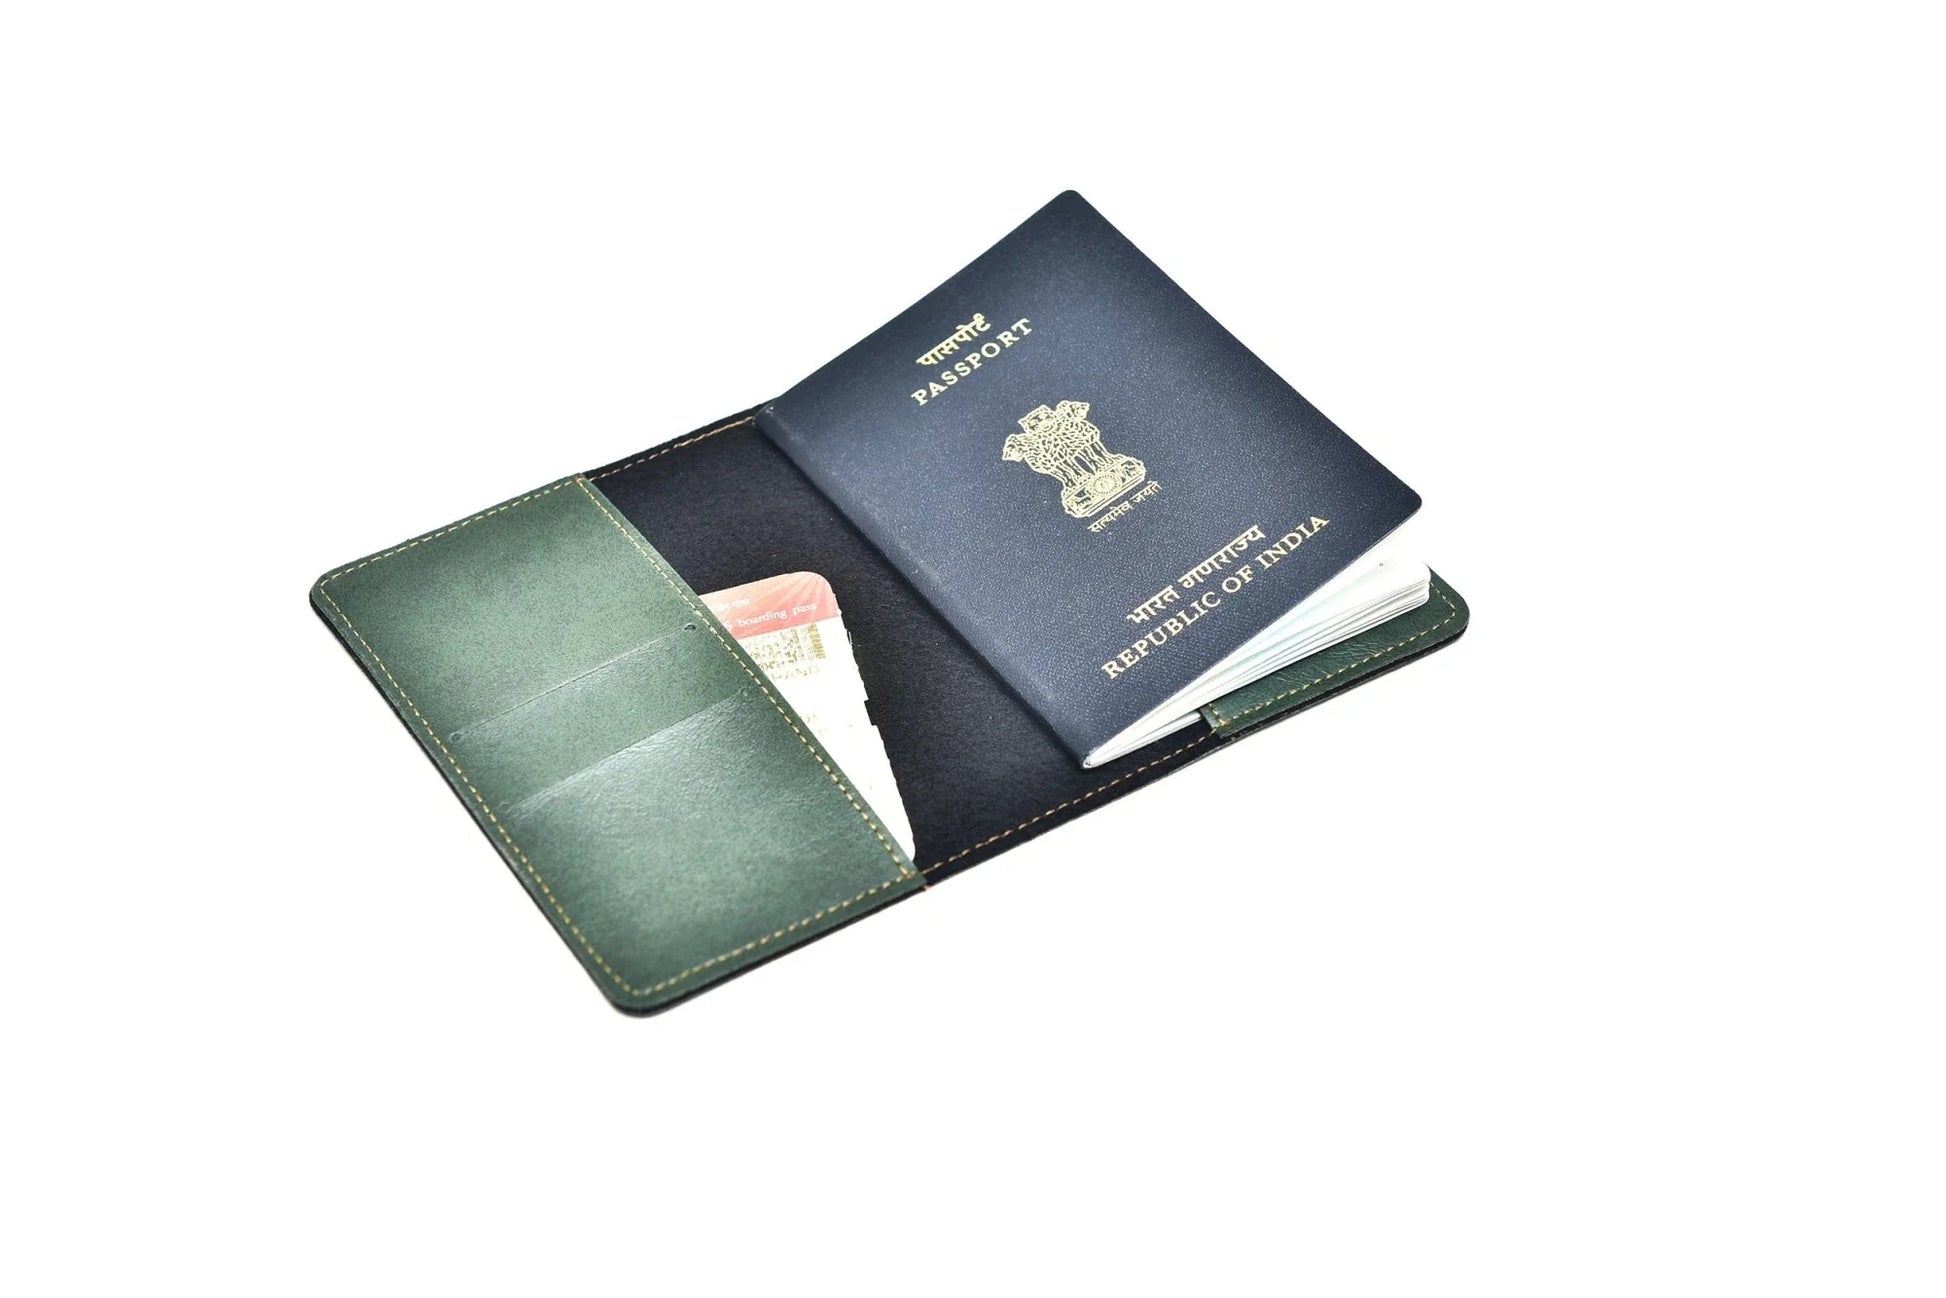 Inside or open view of olive green passport case